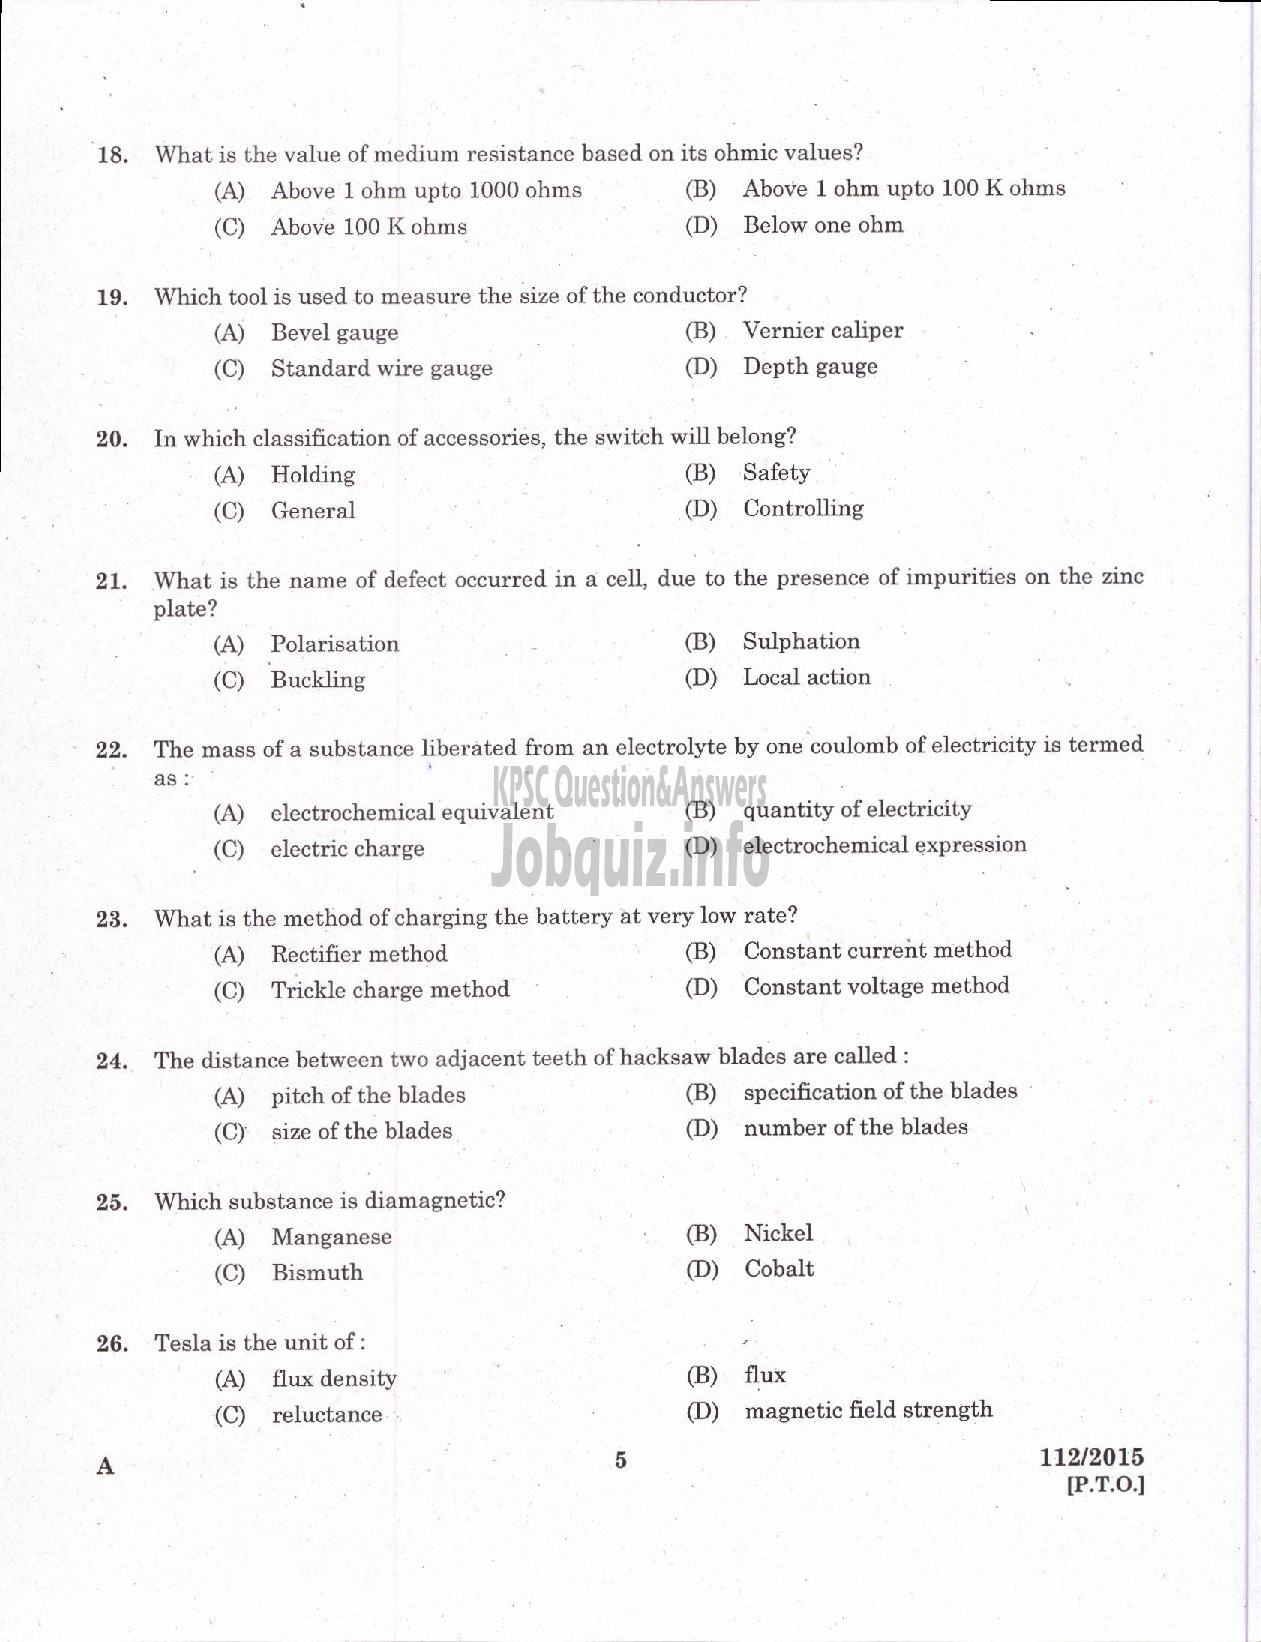 Kerala PSC Question Paper - TRADESMAN ELECTRICAL TECHNICAL EDUCATION/ELECTRICIAN GROUND WATER /ELECTRICIAN GR II PRINTING GOVT PRESSES ELECTRICIAN AGRICULTURE /ELECTRICIAN GR II THE KERALA CERAMICS LTD-3